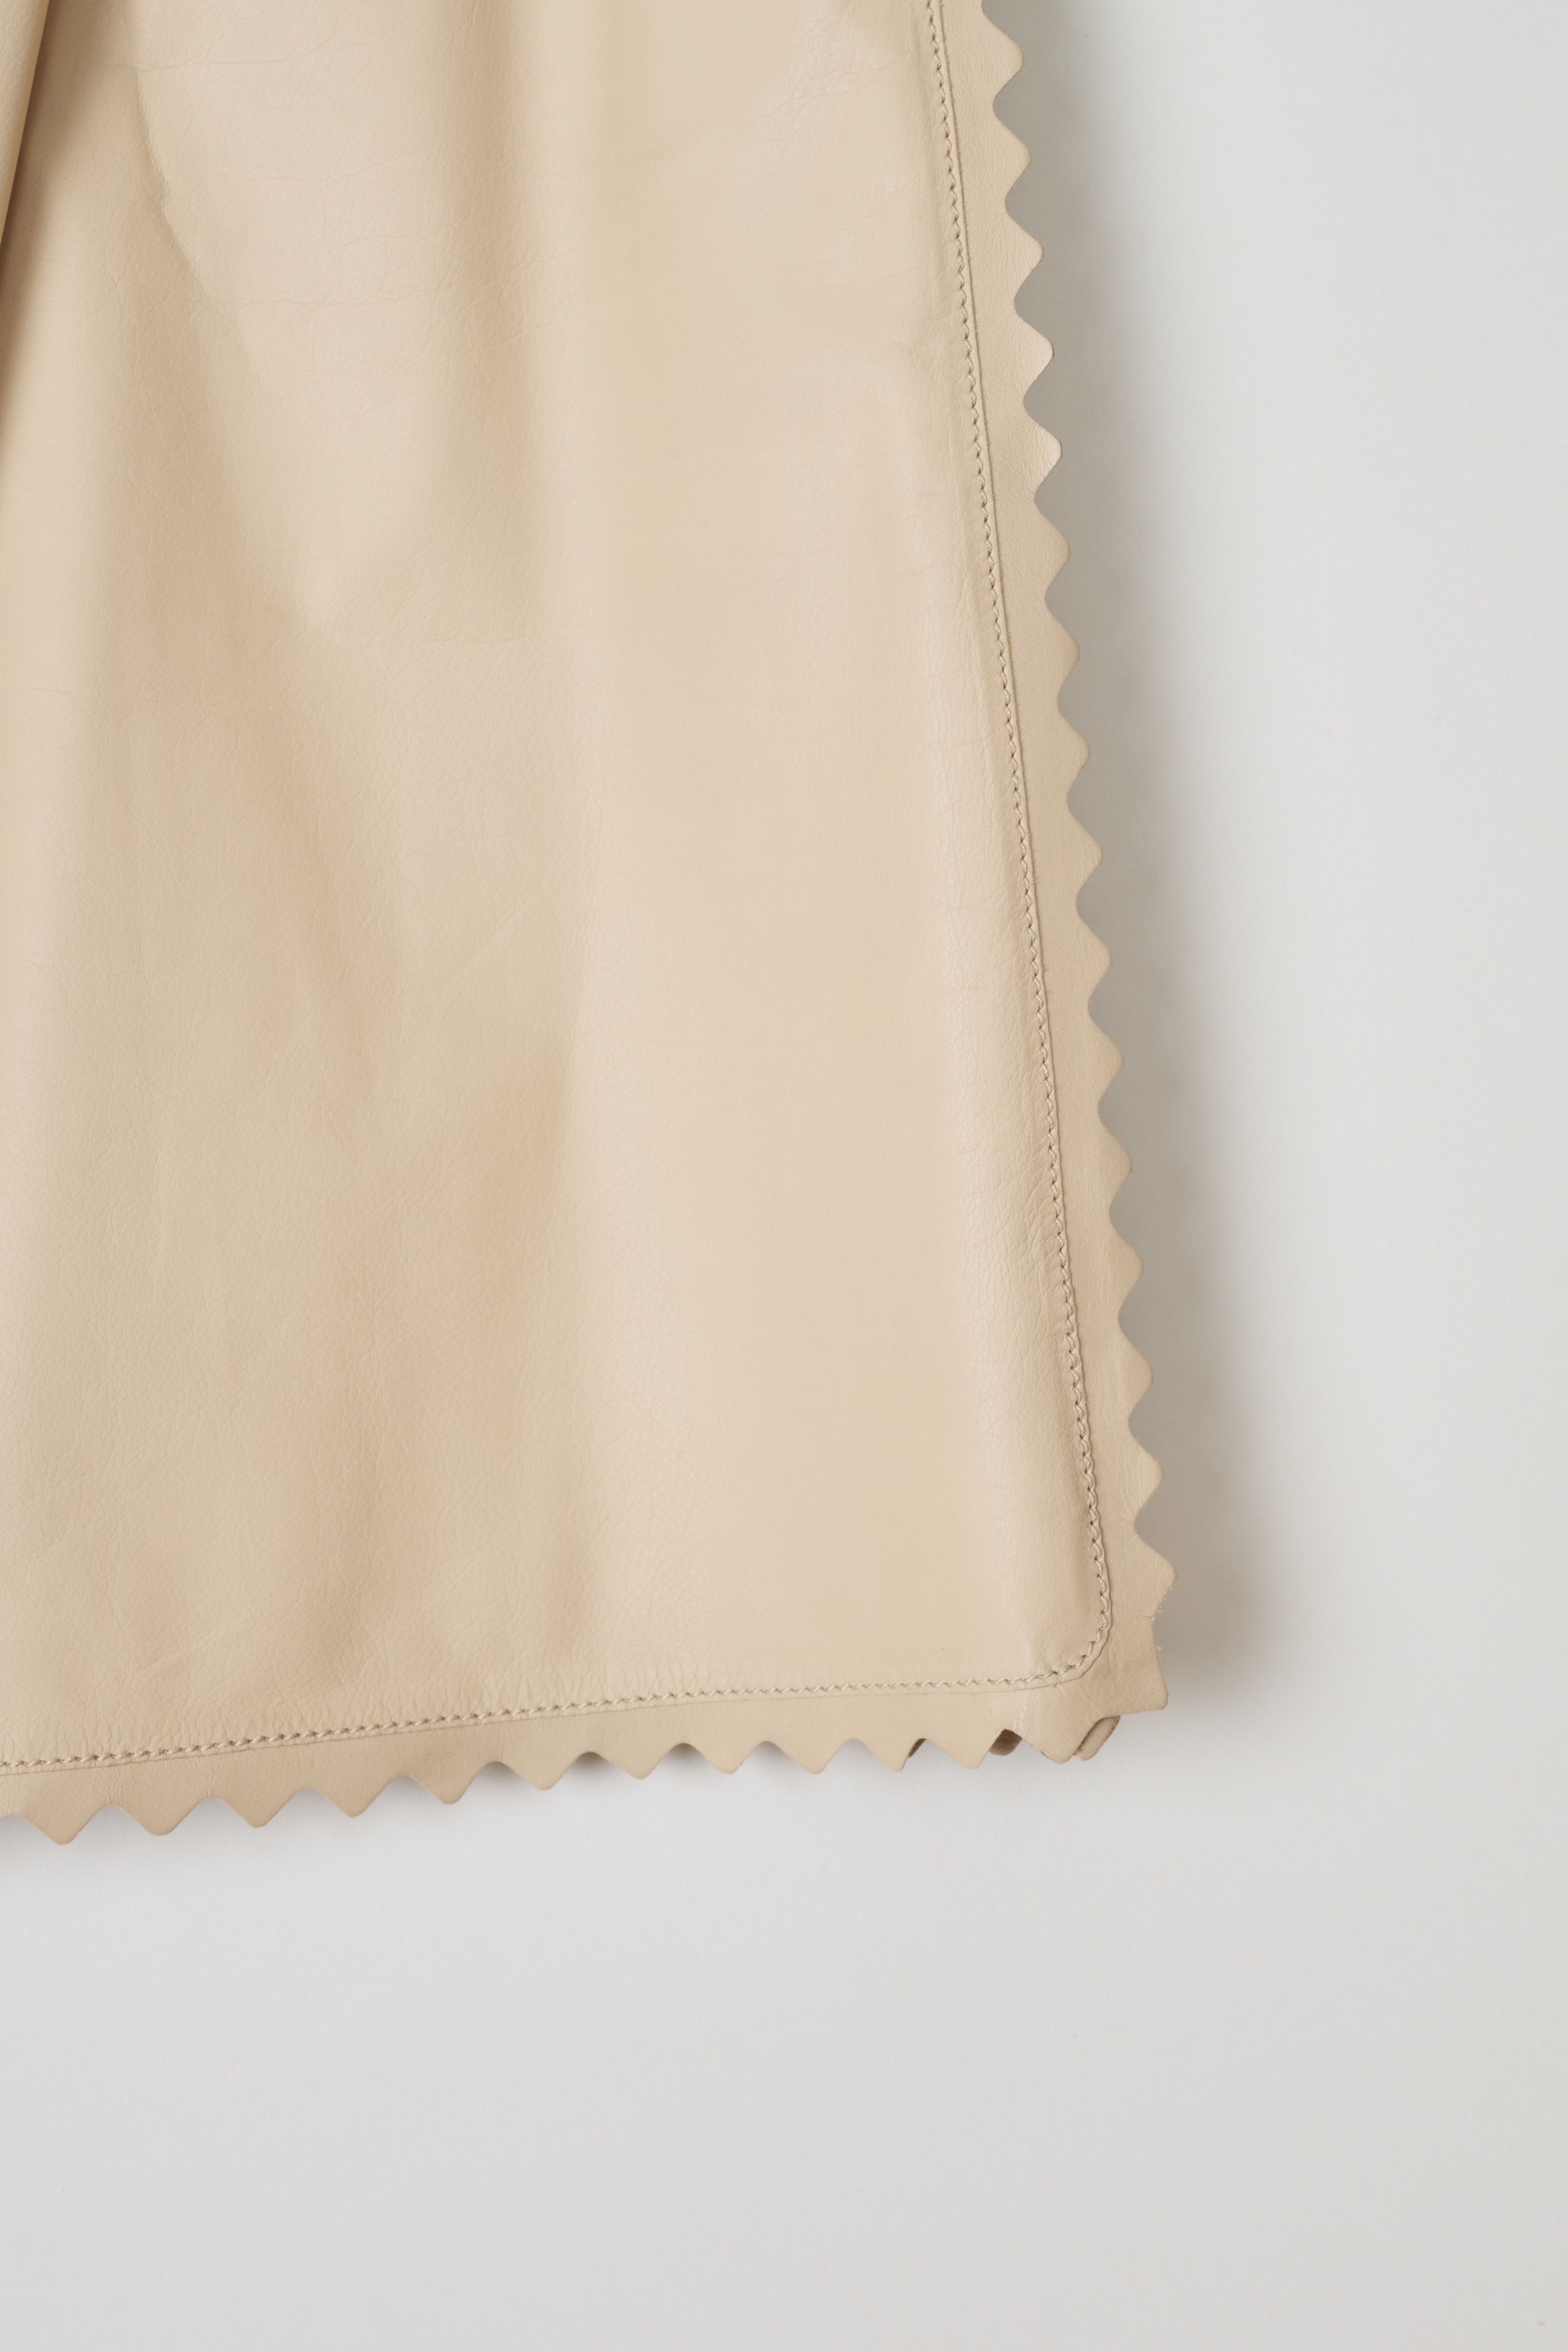 ChloÃ©, Beige leather skirt with frilled edges, 13SCJ03_13S204_ginger_beige, beige detail. Calfskin crafted into a lovely skirt, coloured to a shade of beige, scalloped edges at hem, waist and side seam and. The fastening option can be found on the side seam.